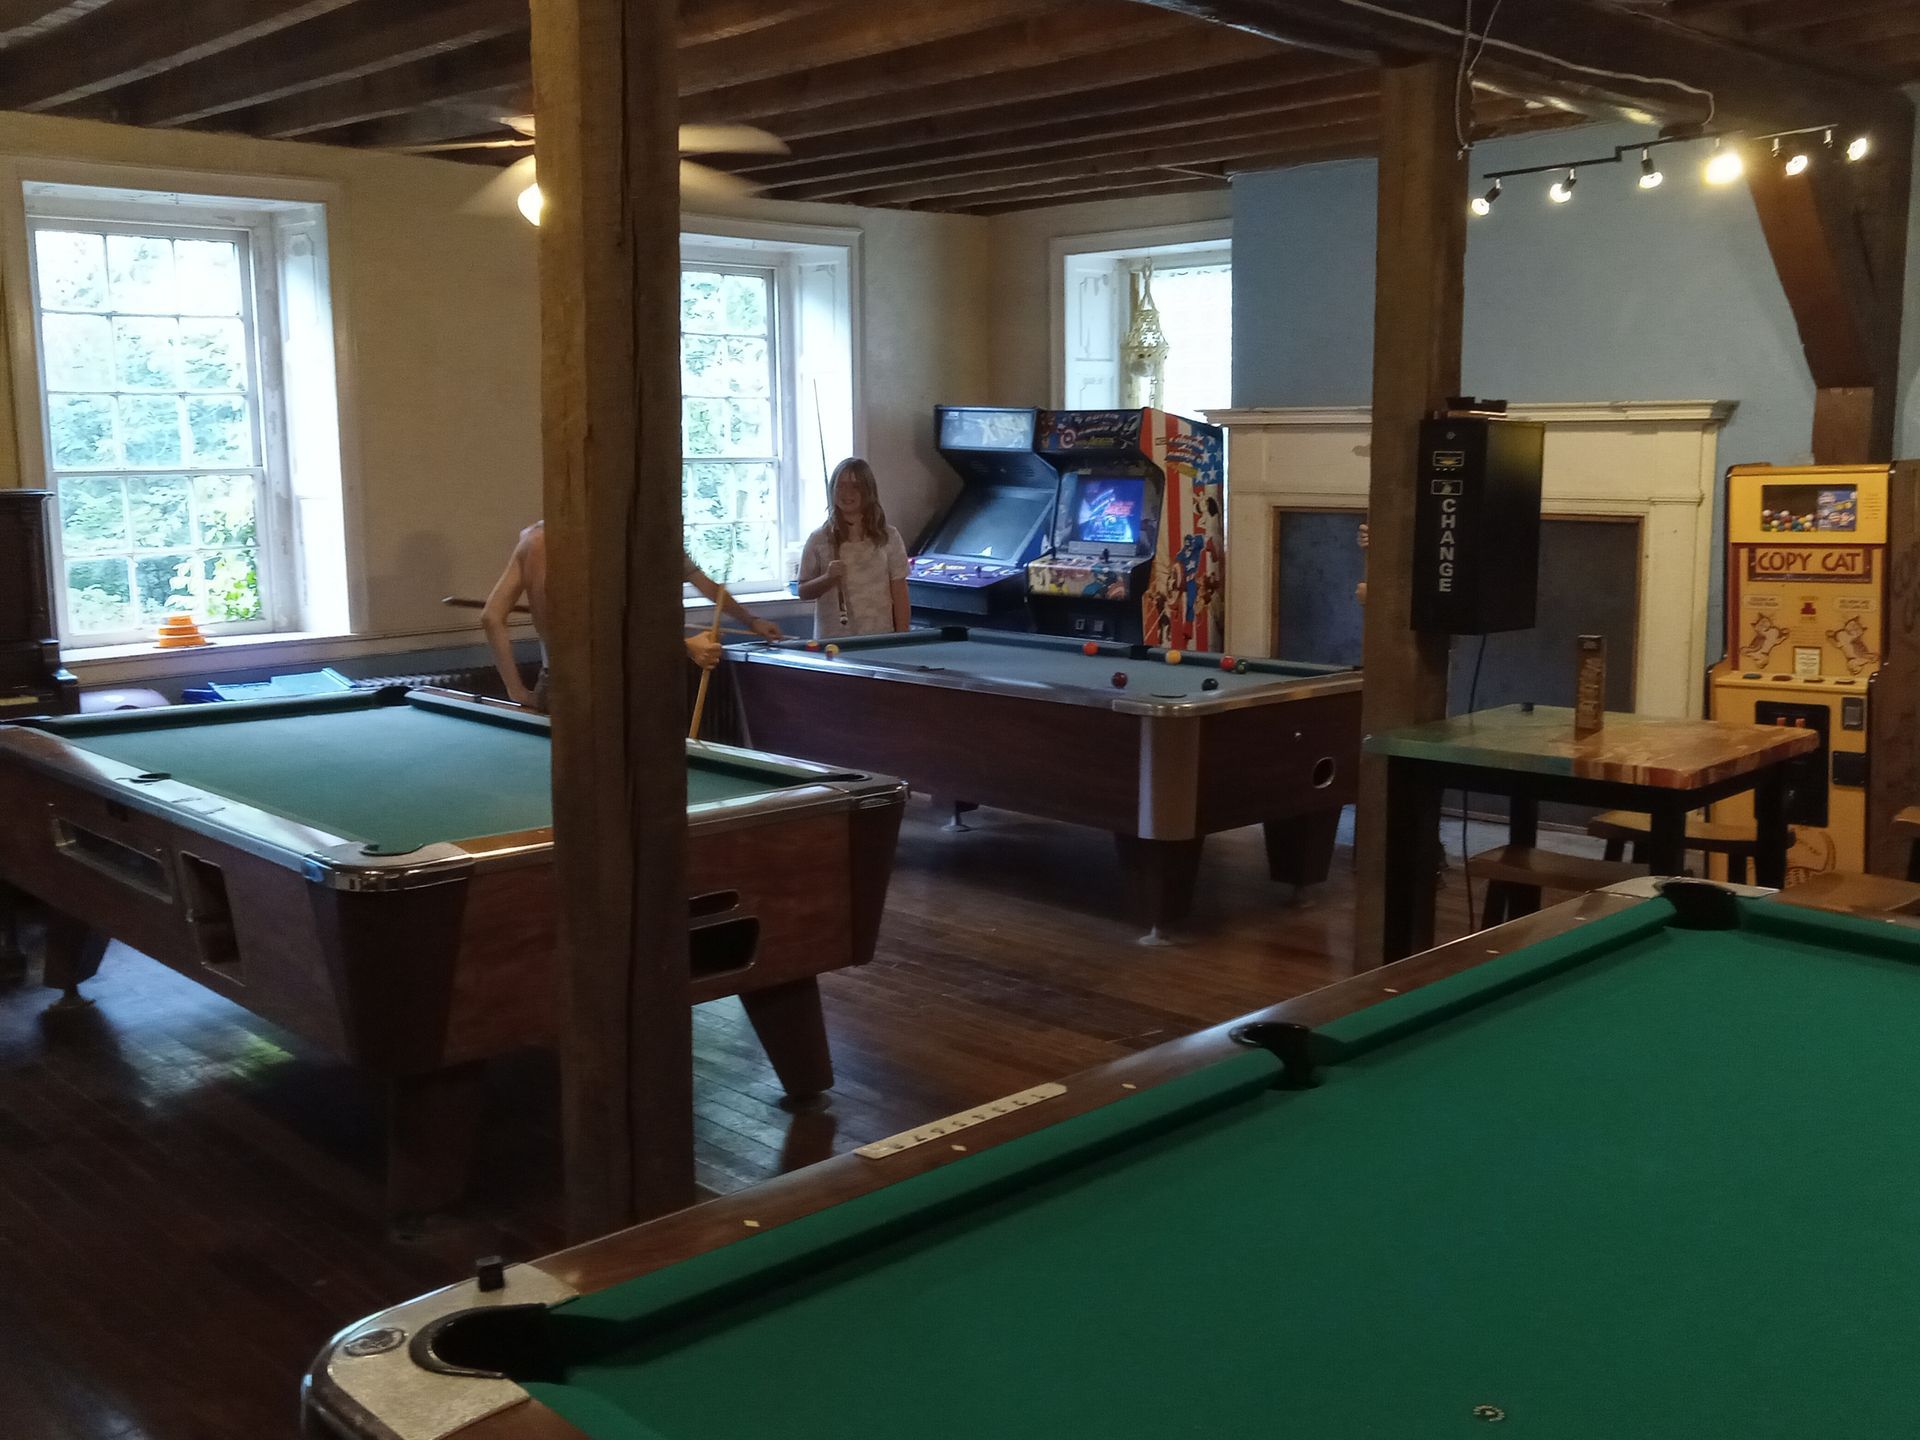 A room with pool tables and an arcade machine